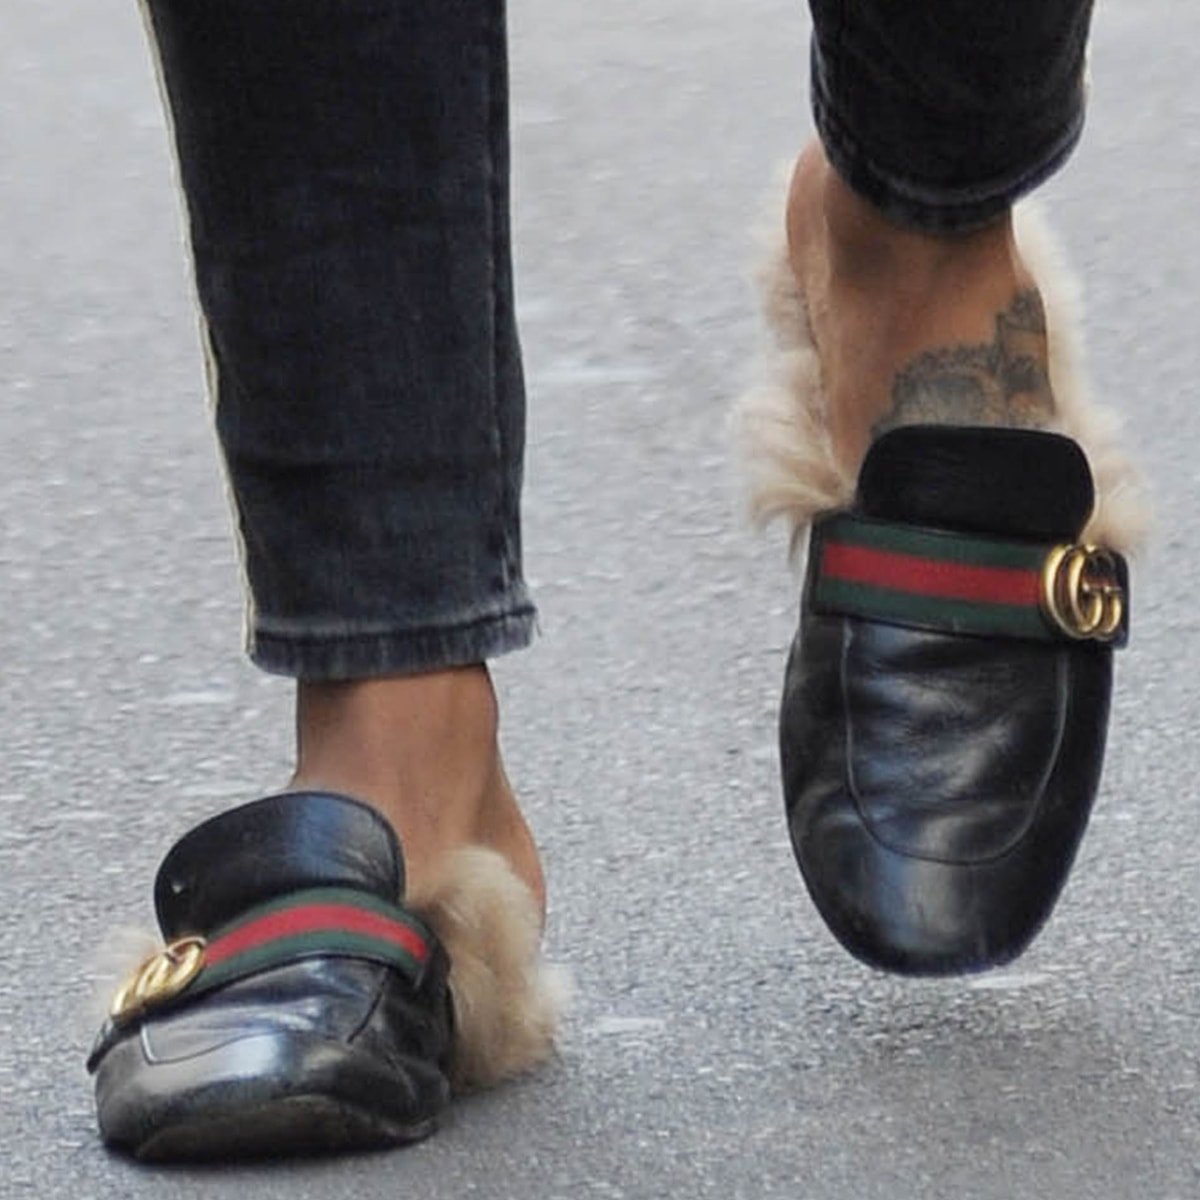 Gucci is renowned for its distinctive designs, from the iconic double G logo to the elegant horse-bit detail, embodying luxury and Italian craftsmanship